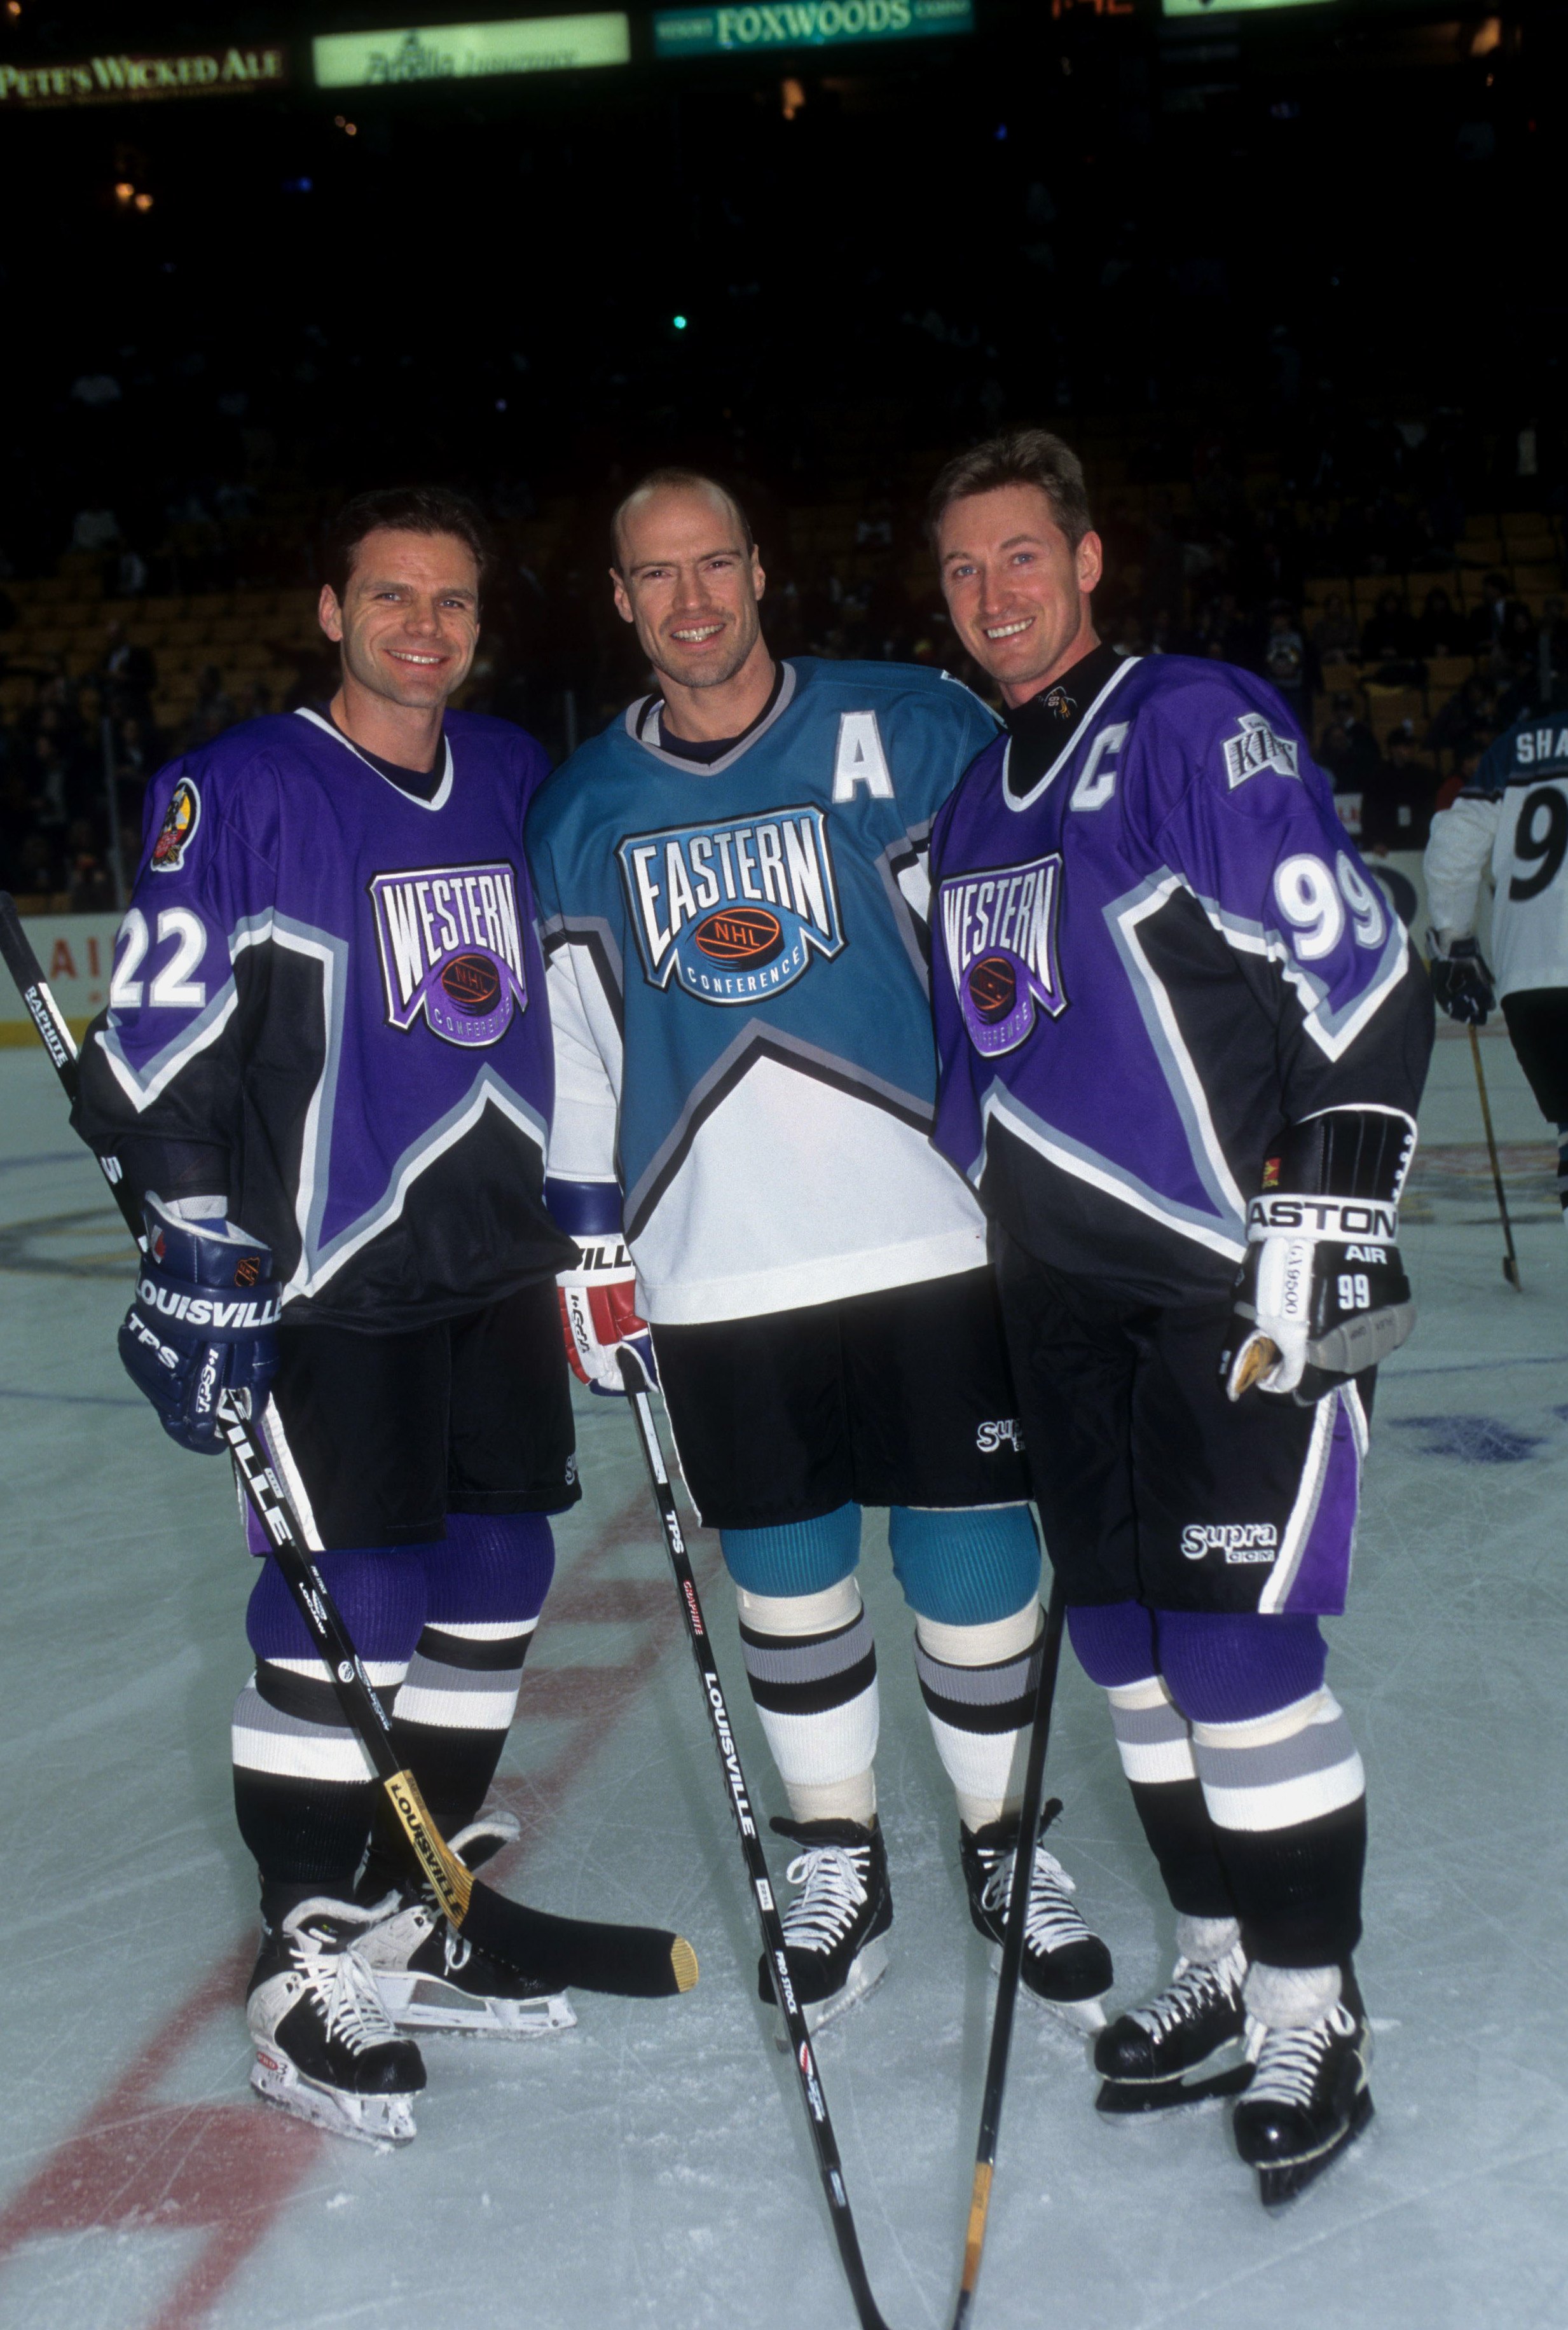 1996 46th NHL All-Star Game: Western Conference v Eastern Conference